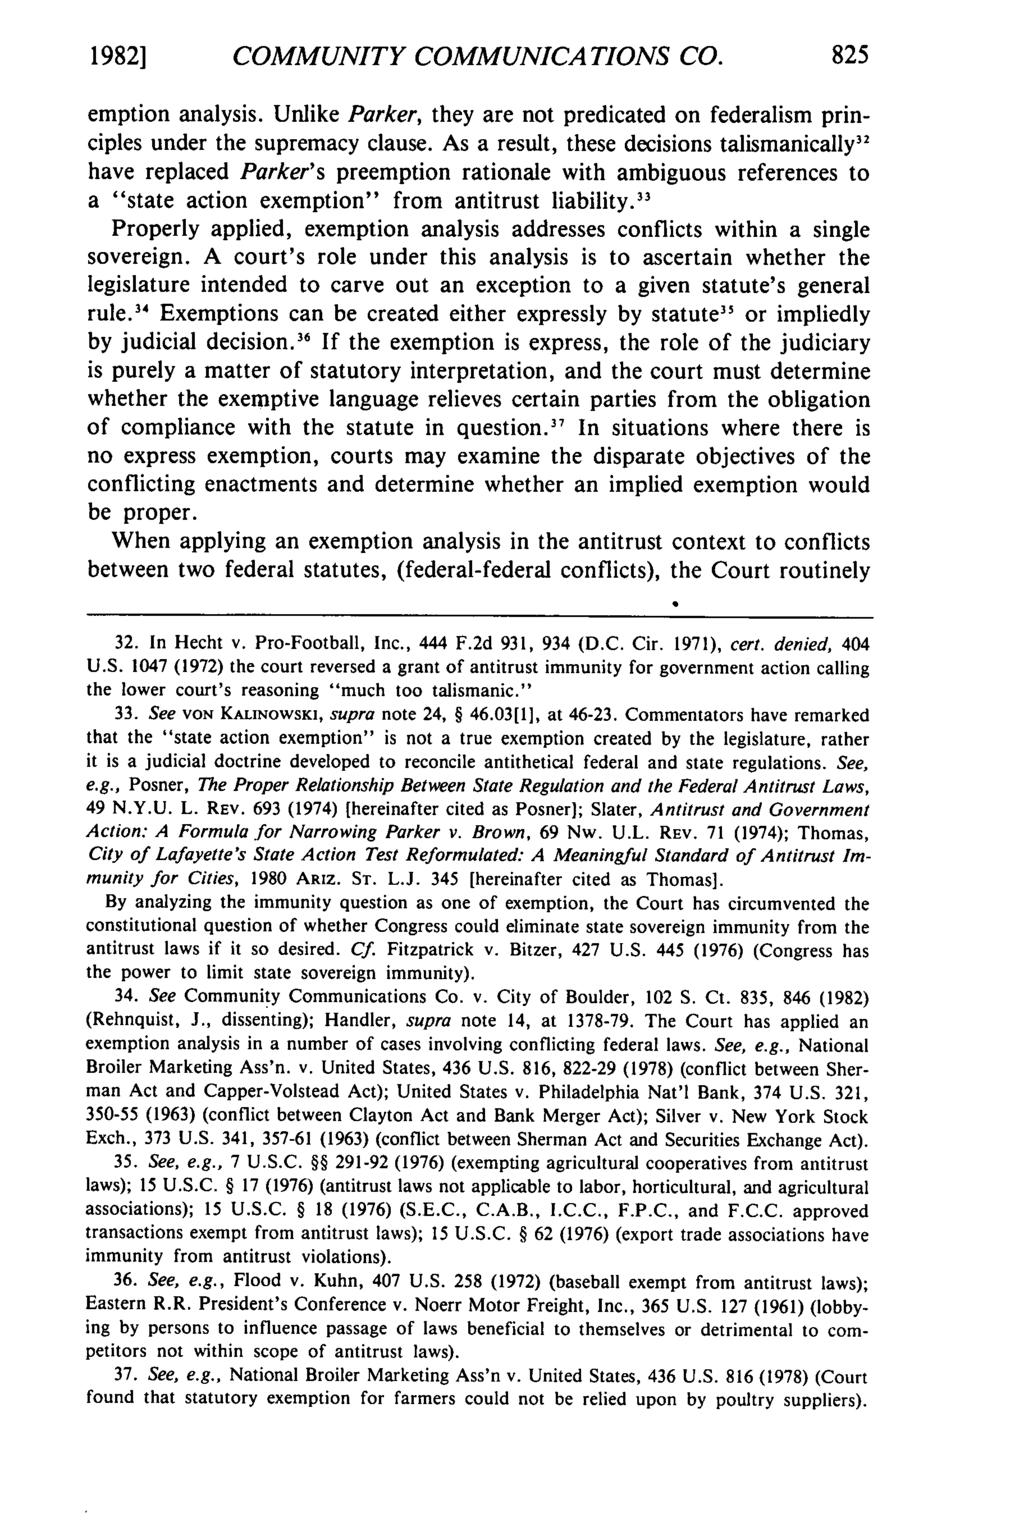 1982] COMMUNITY COMMUNICATIONS CO. emption analysis. Unlike Parker, they are not predicated on federalism principles under the supremacy clause.